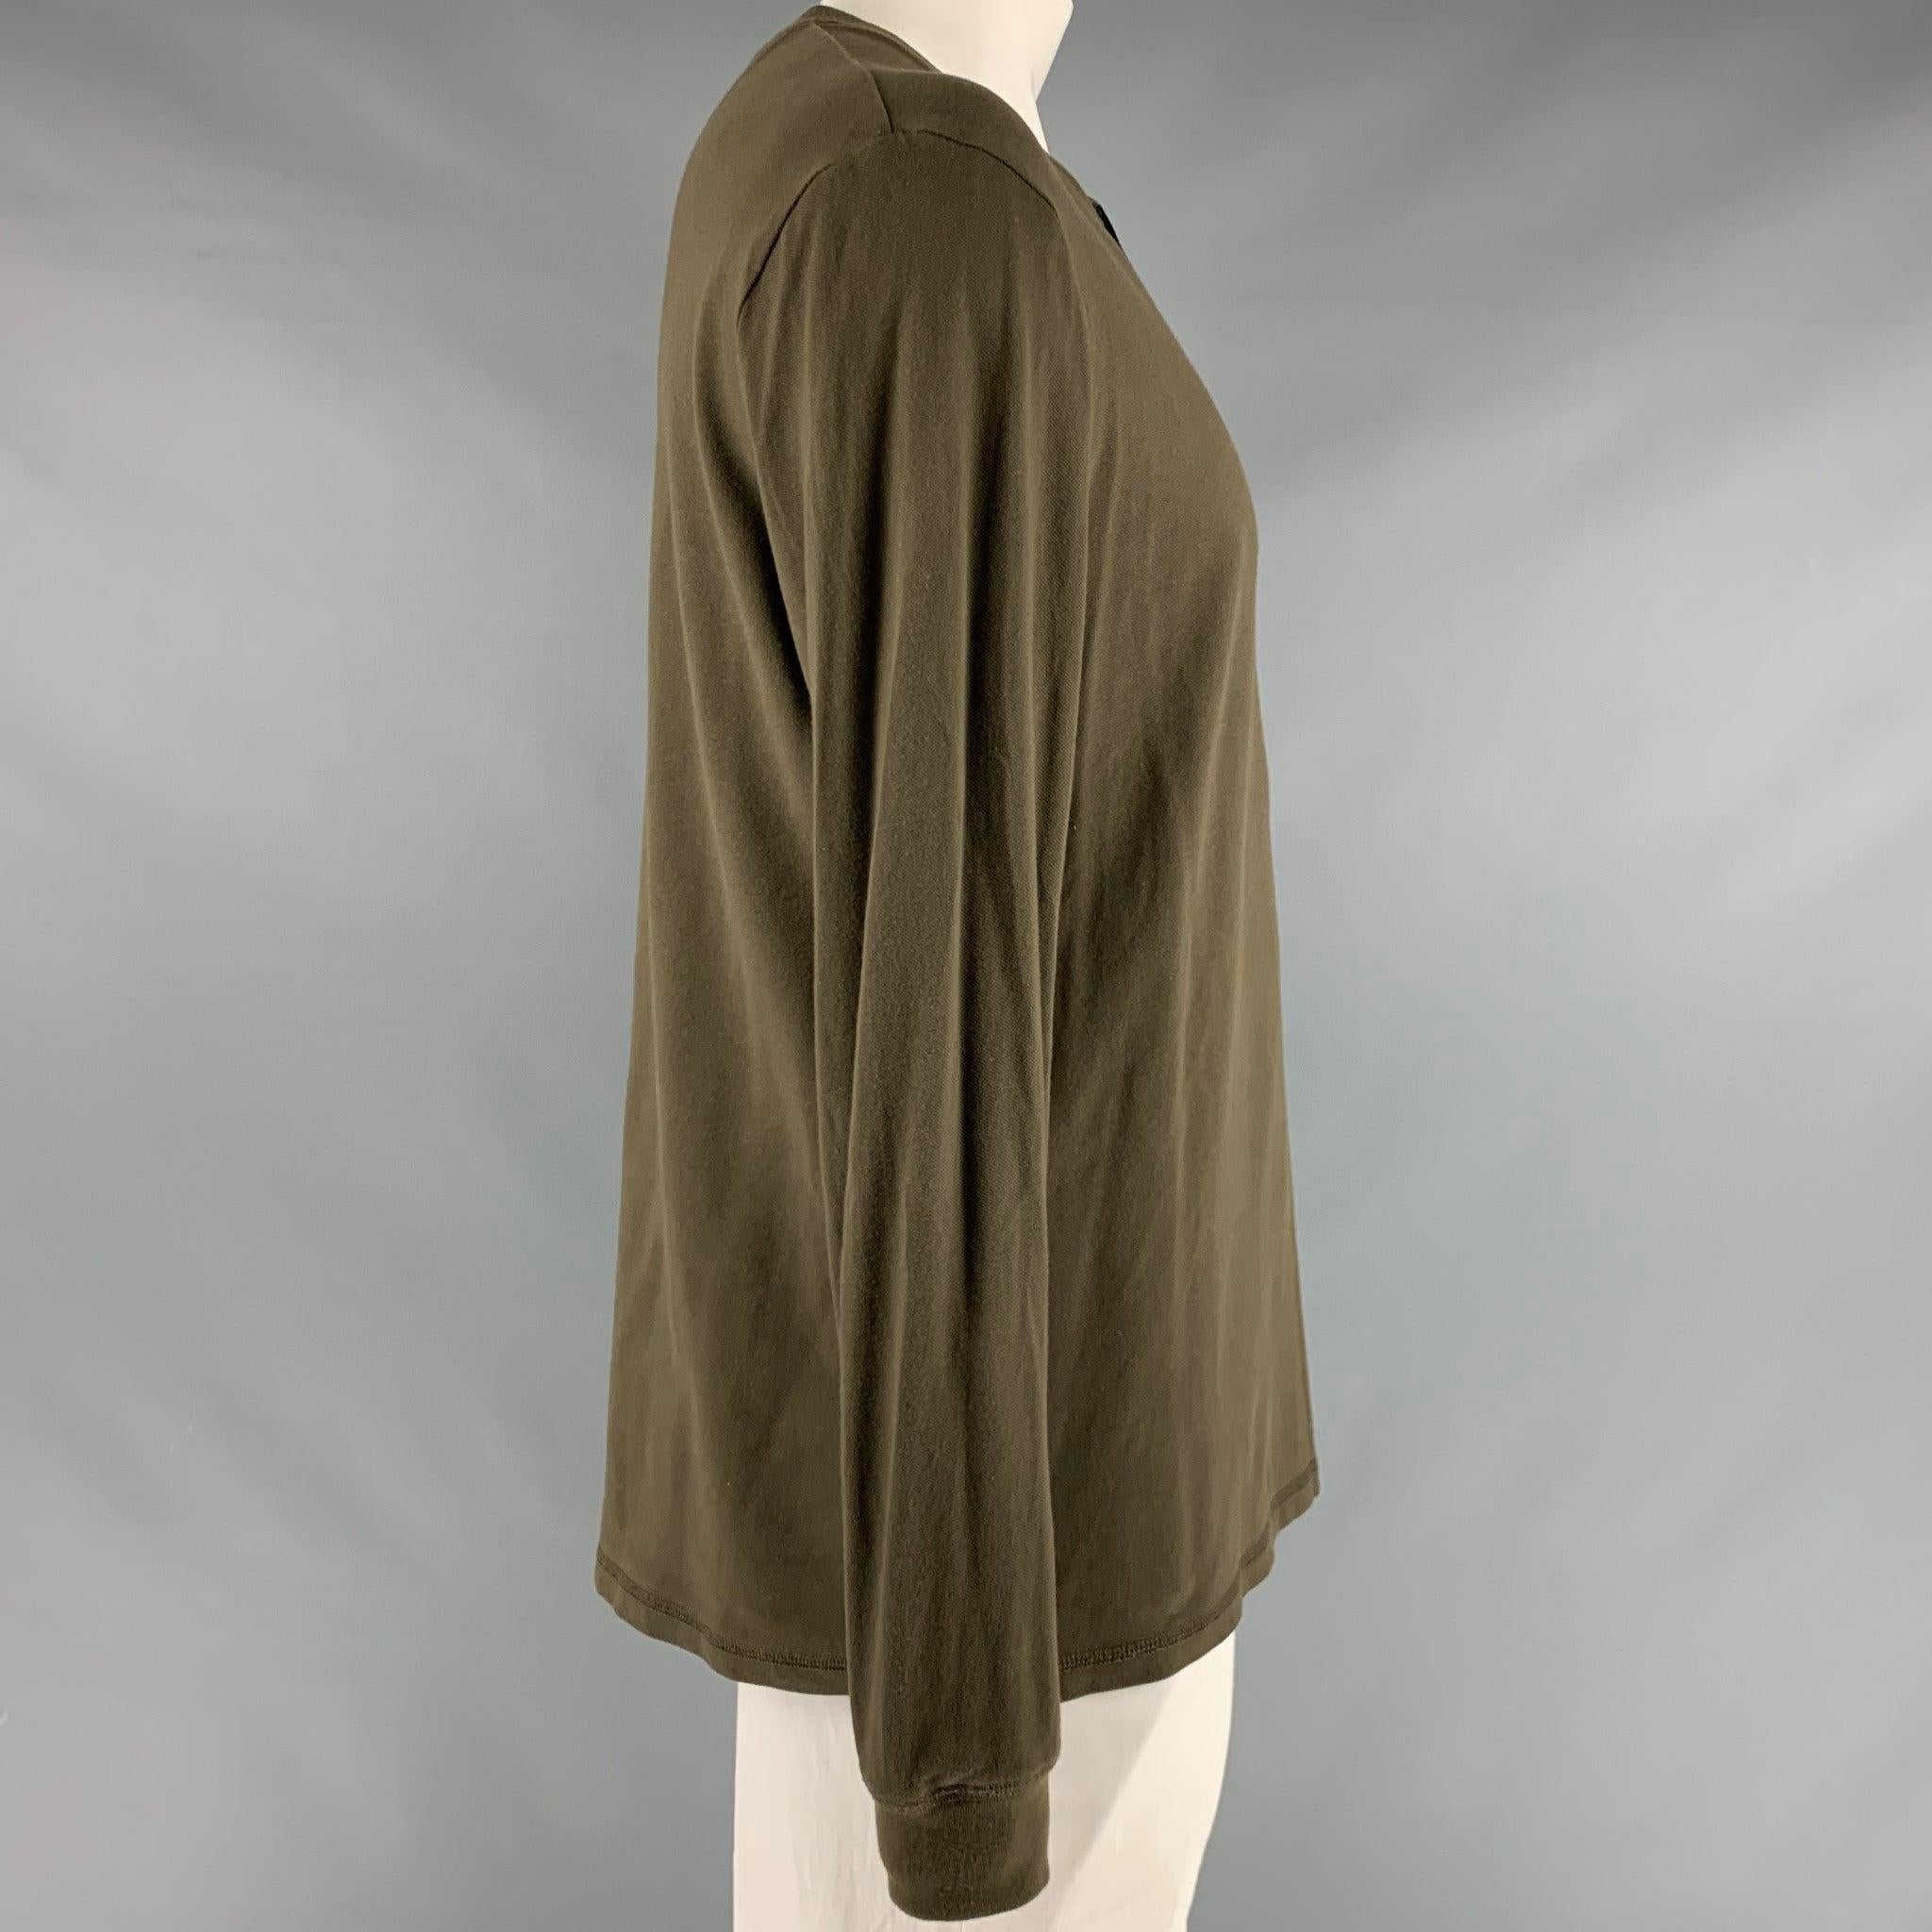 3.1 PHILLIP LIM x TARGET 20th Anniversary Collection pullover in a brown cotton blend featuring grey contrast placket with three button closure.Good Pre-Owned Condition. Moderate signs of wear, as is. 

Marked:   L 

Measurements: 
 
Shoulder: 20